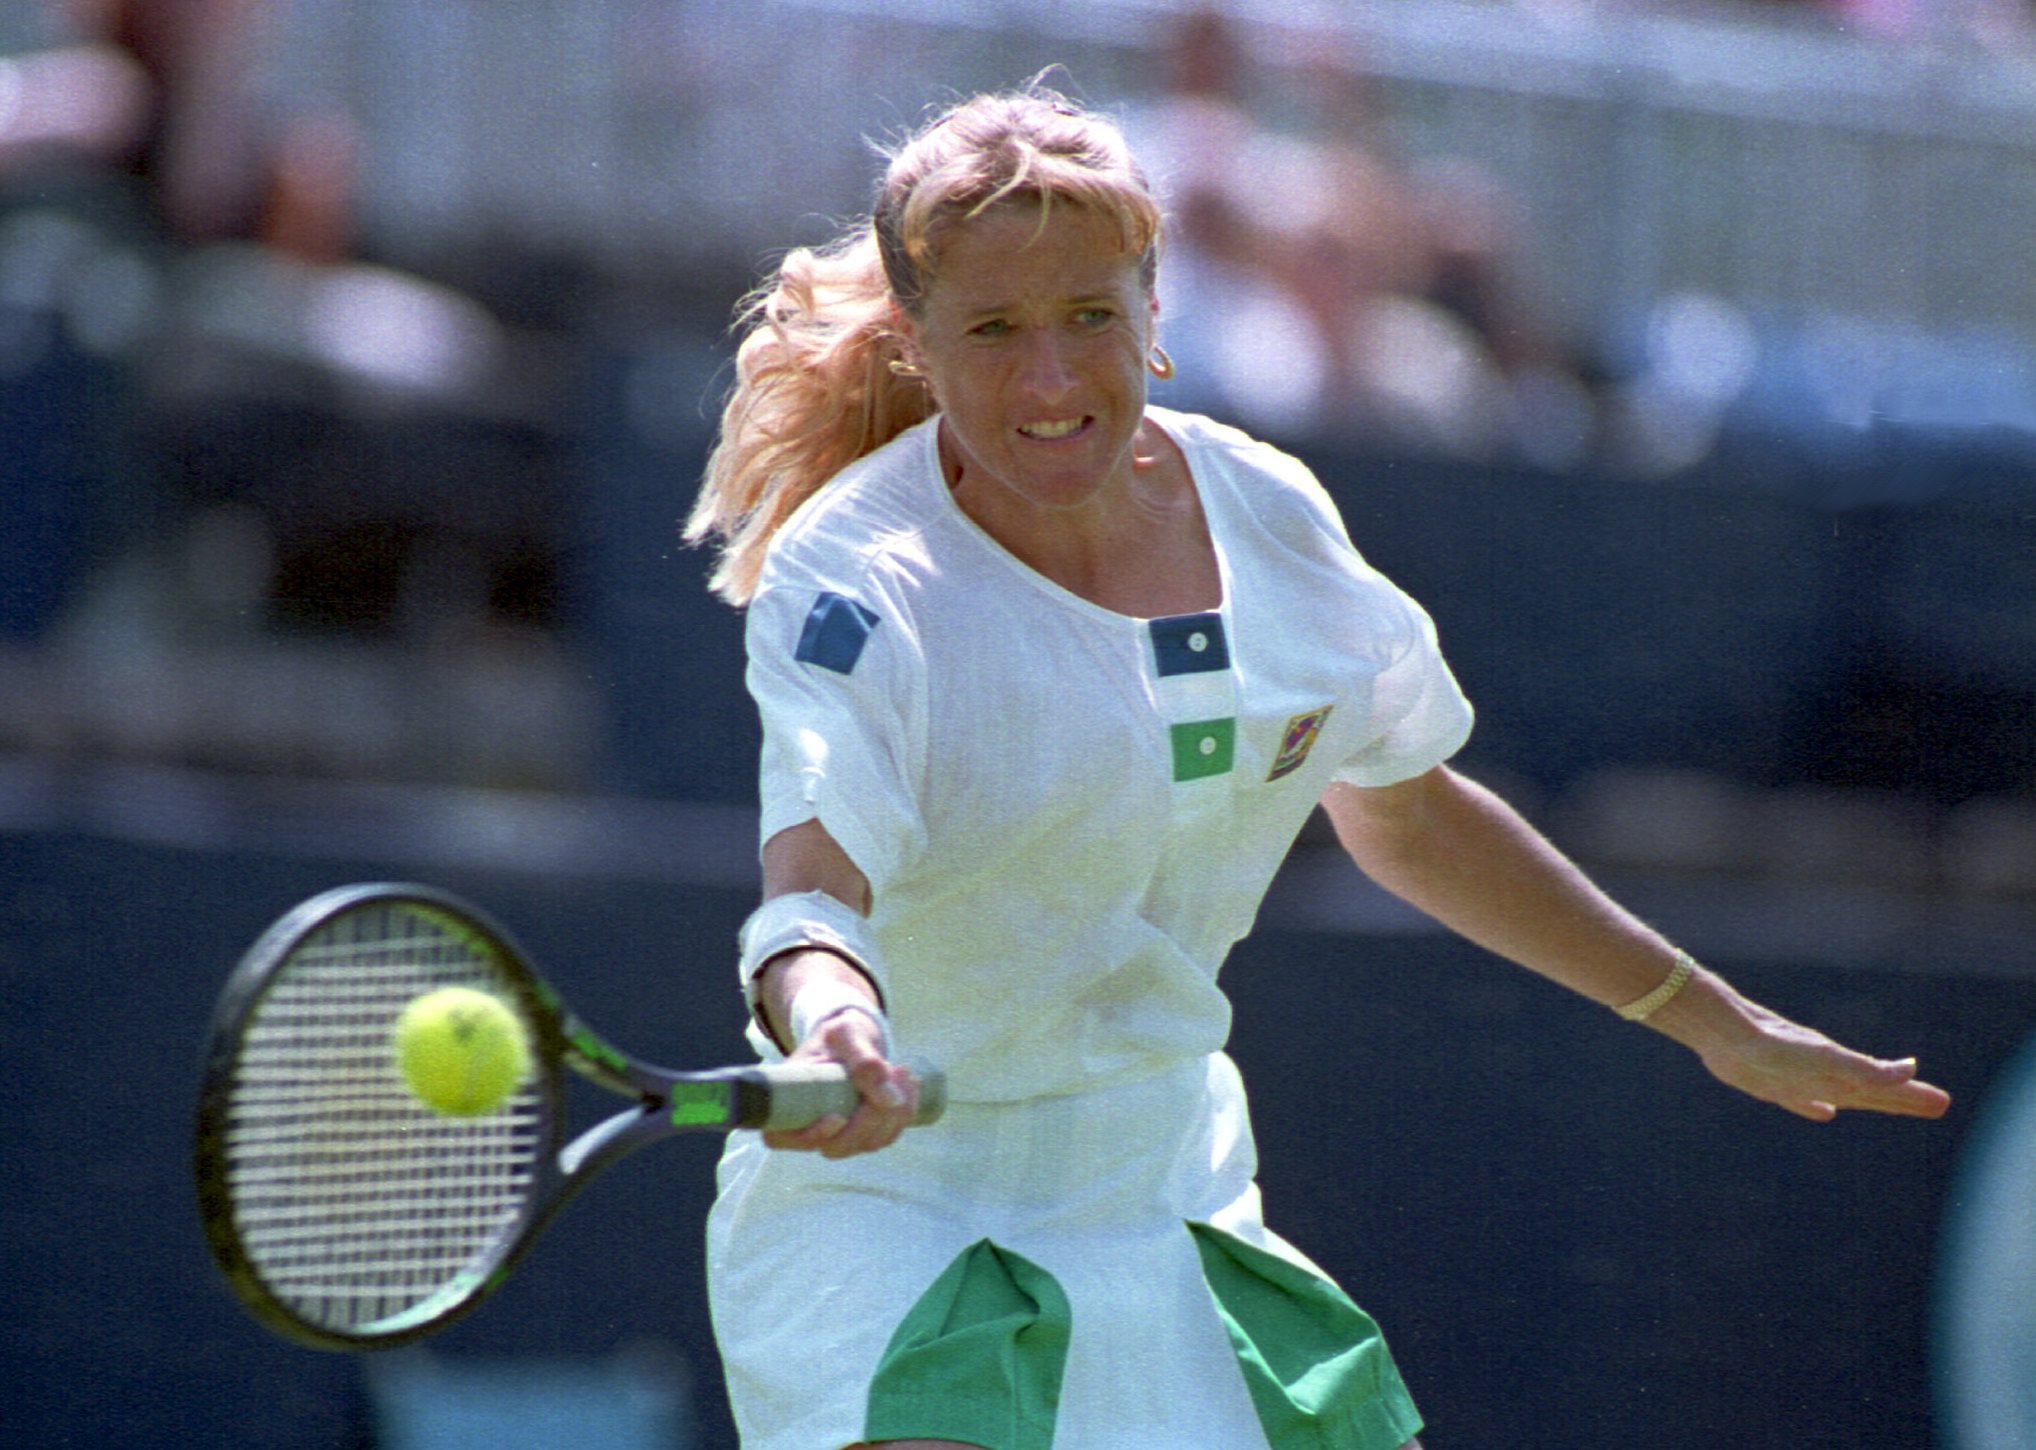 13 JUN 1994:  TRACY AUSTIN OF THE USA PLAYS A FOREHAND DURING HER DEFEAT BY KRISTINE RADFORD OF AUSTRALIA IN THE FIRST ROUND OF THE VOLKSWAGEN CUP IN EASTBOURNE, ENGLAND. Mandatory Credit: Gary Prior/ALLSPORT